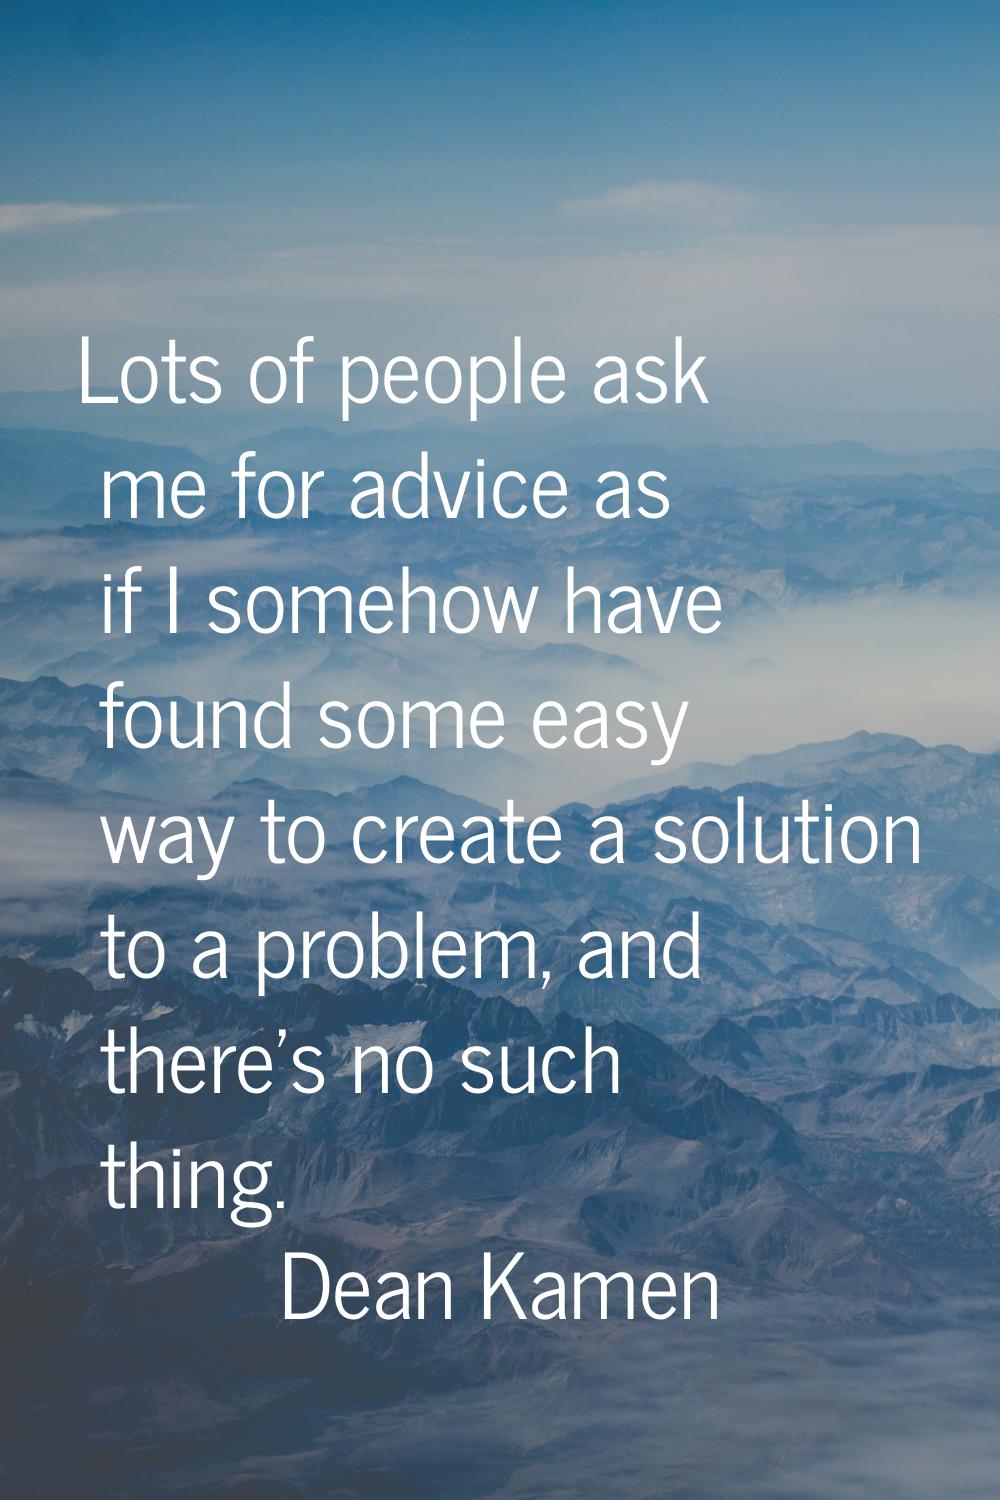 Lots of people ask me for advice as if I somehow have found some easy way to create a solution to a